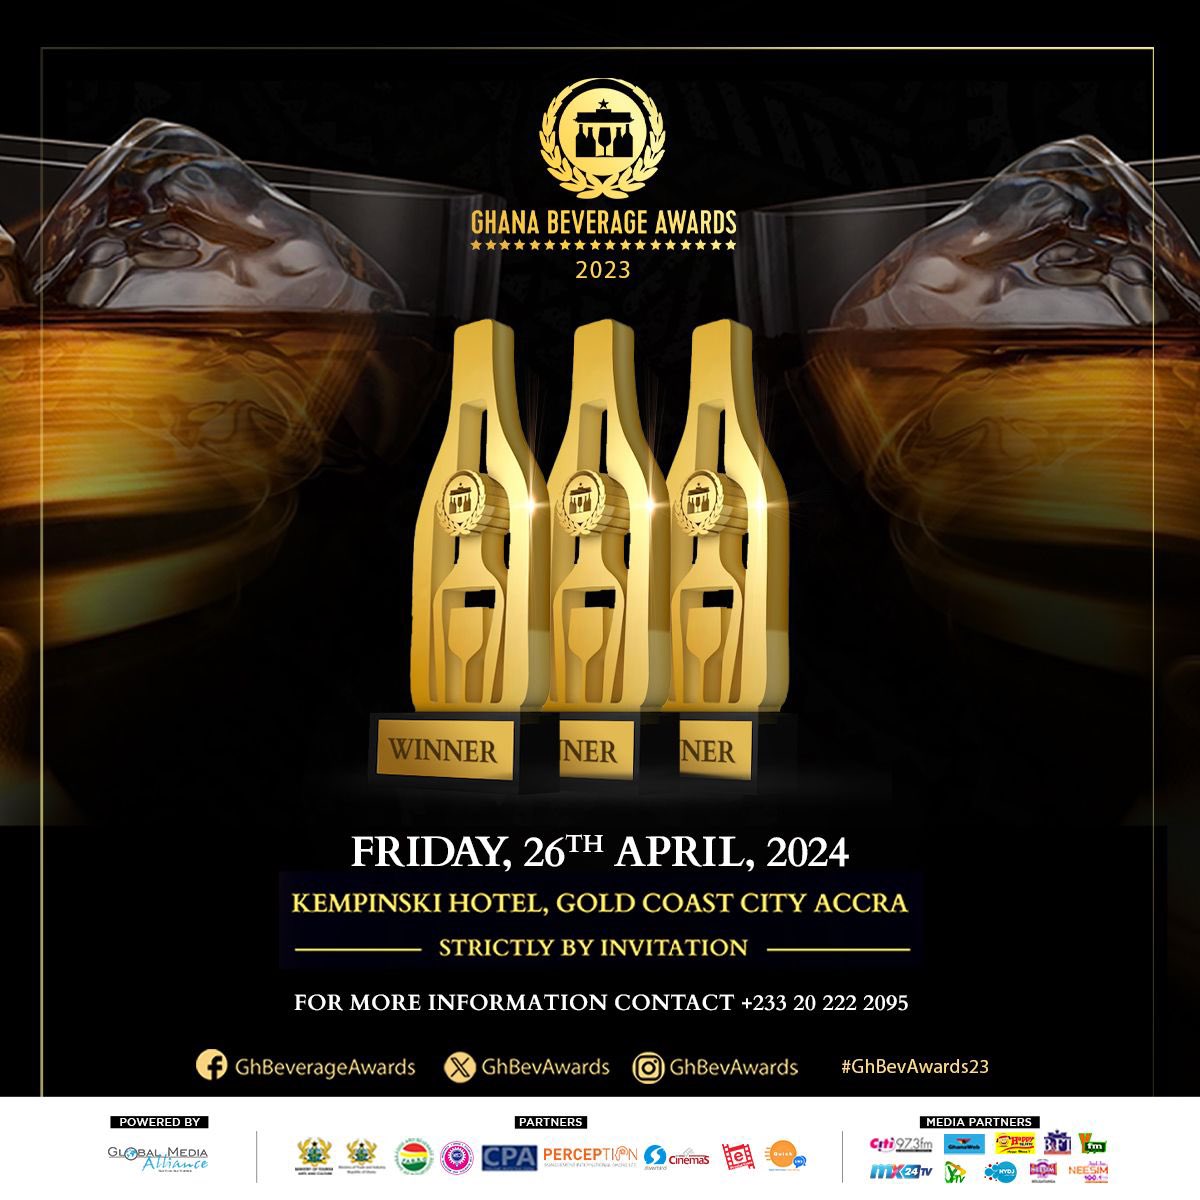 #GhBevAwards23 is happening tonight. Kempinski be the location!!